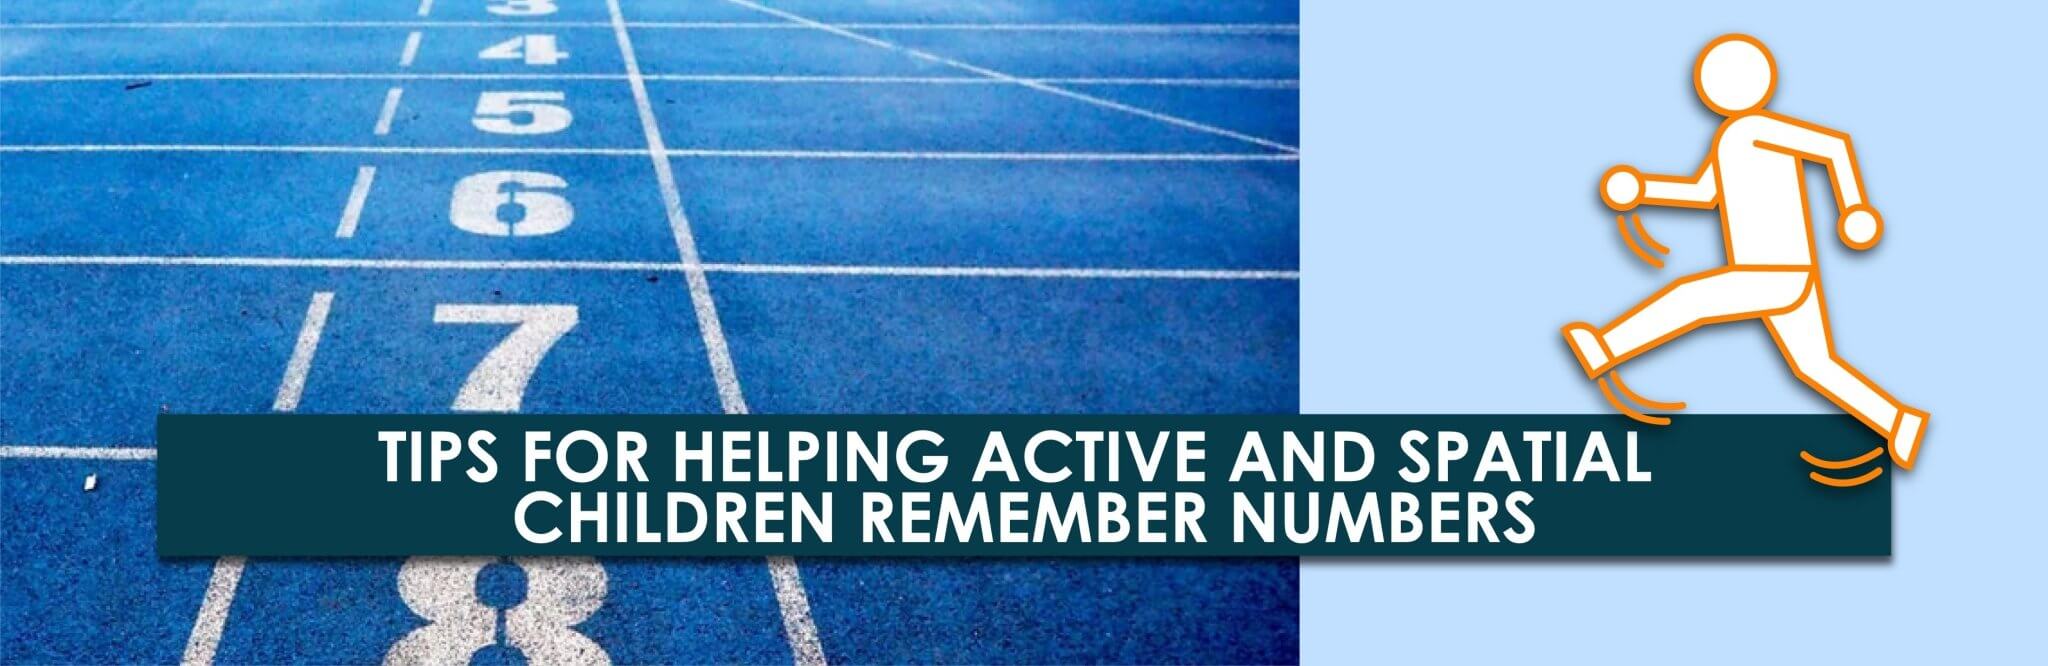 Tips for Helping Active and Spatial Children Remember Numbers